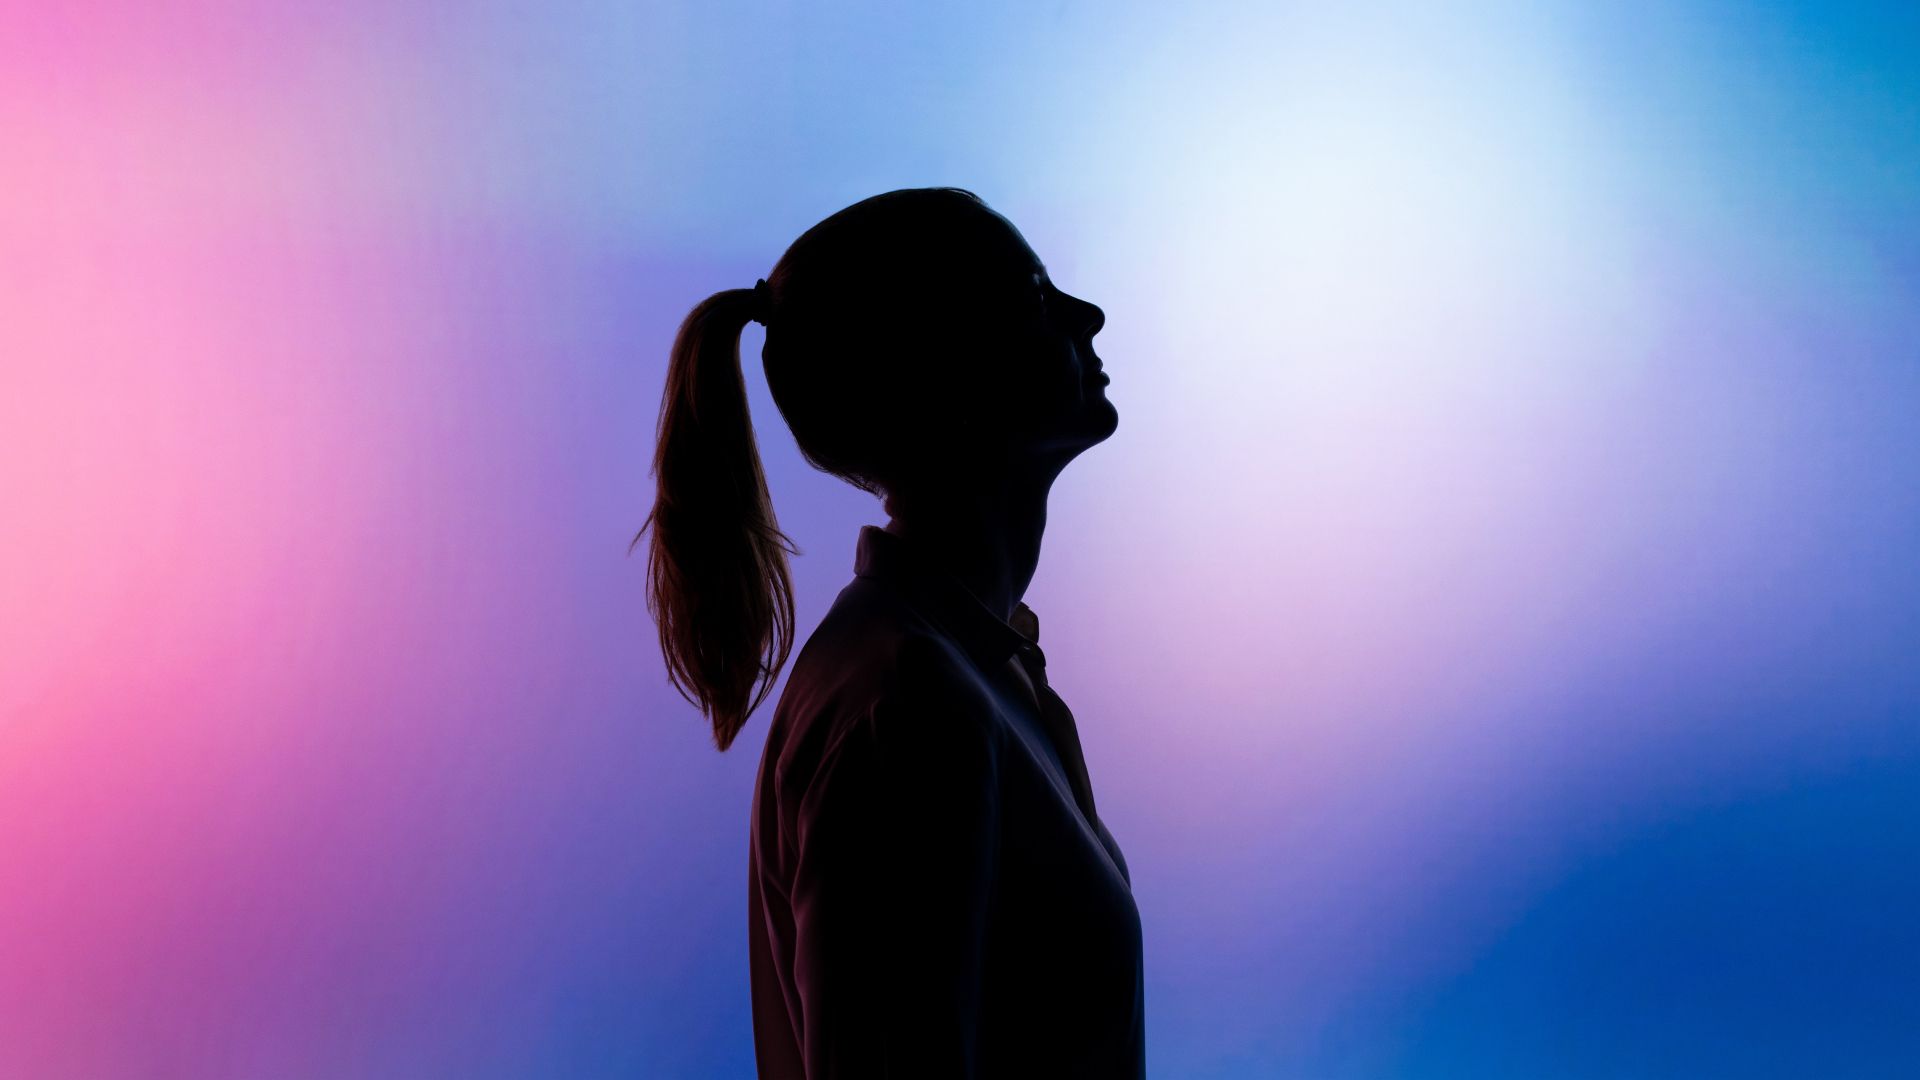 Silhouette of a woman with a ponytail against a pink and blue background.